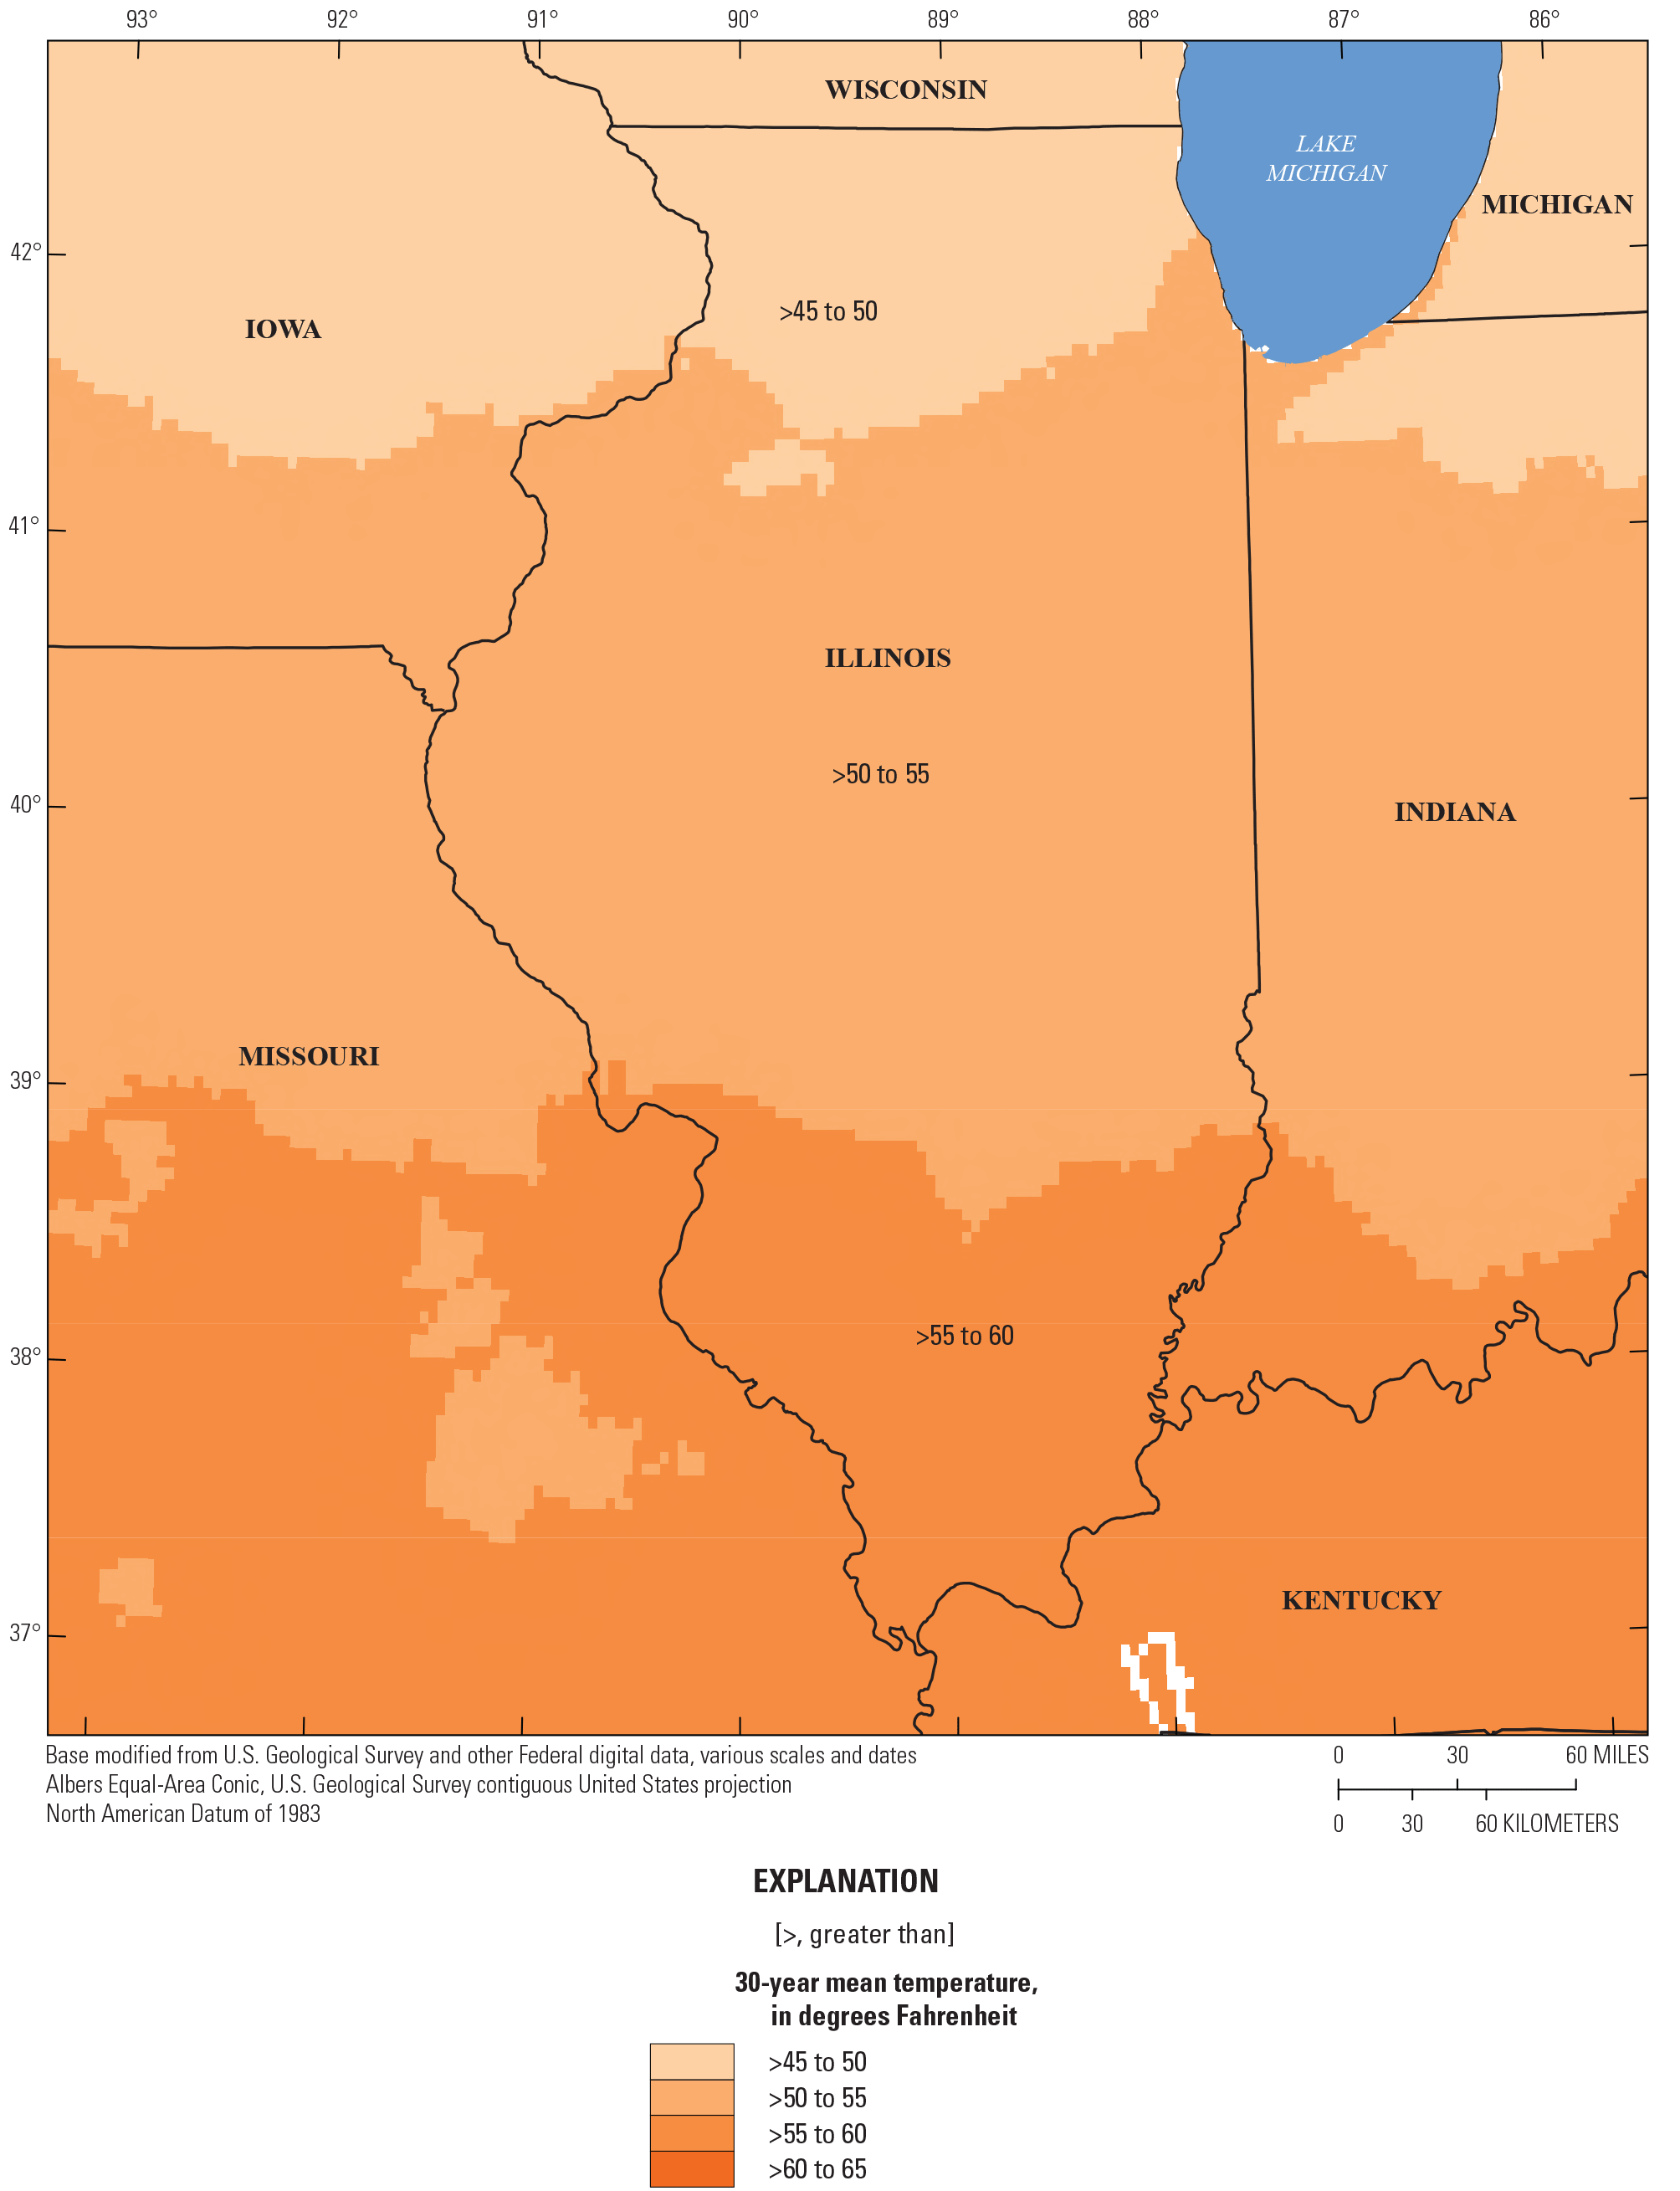 30-year mean annual temperature in Illinois, which increases towards the south.